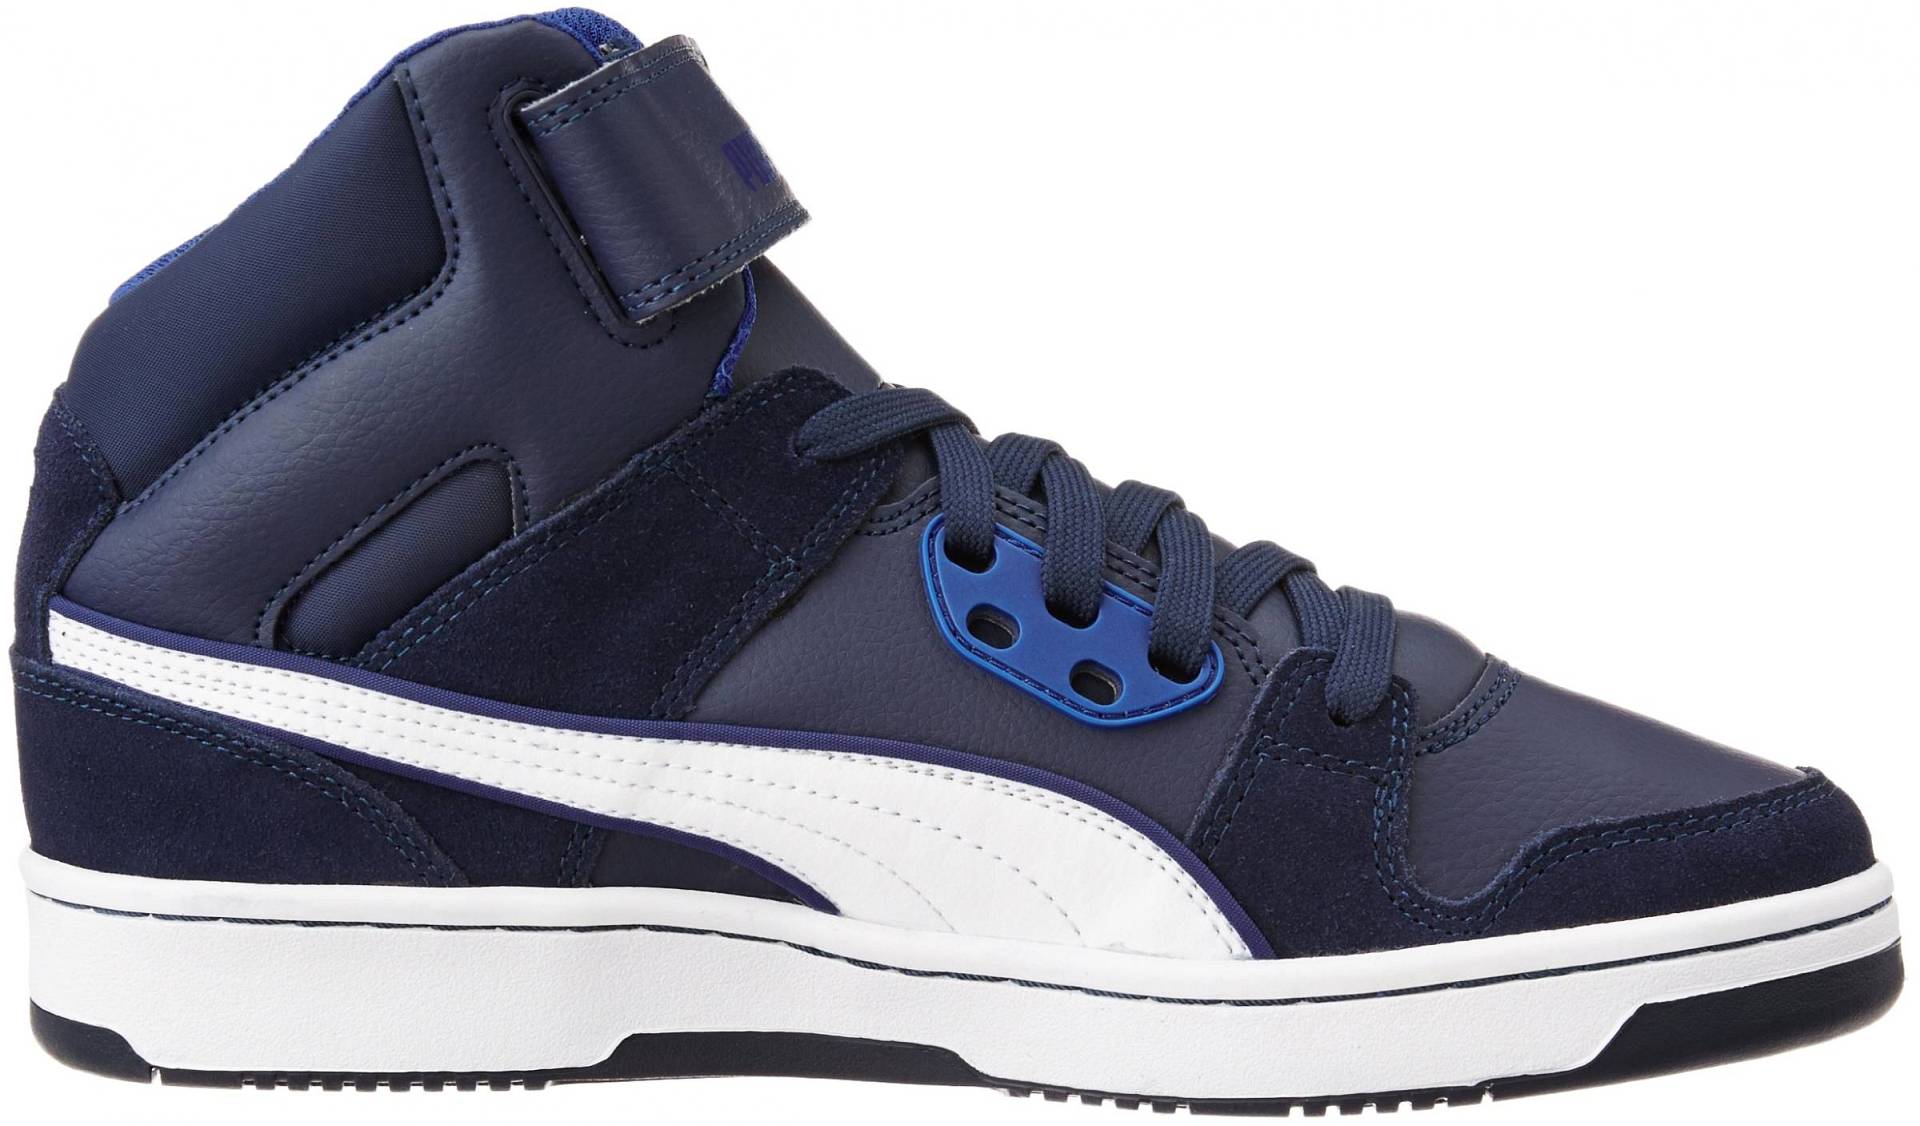 Puma Rebound Street SD – Shoes Reviews & Reasons To Buy